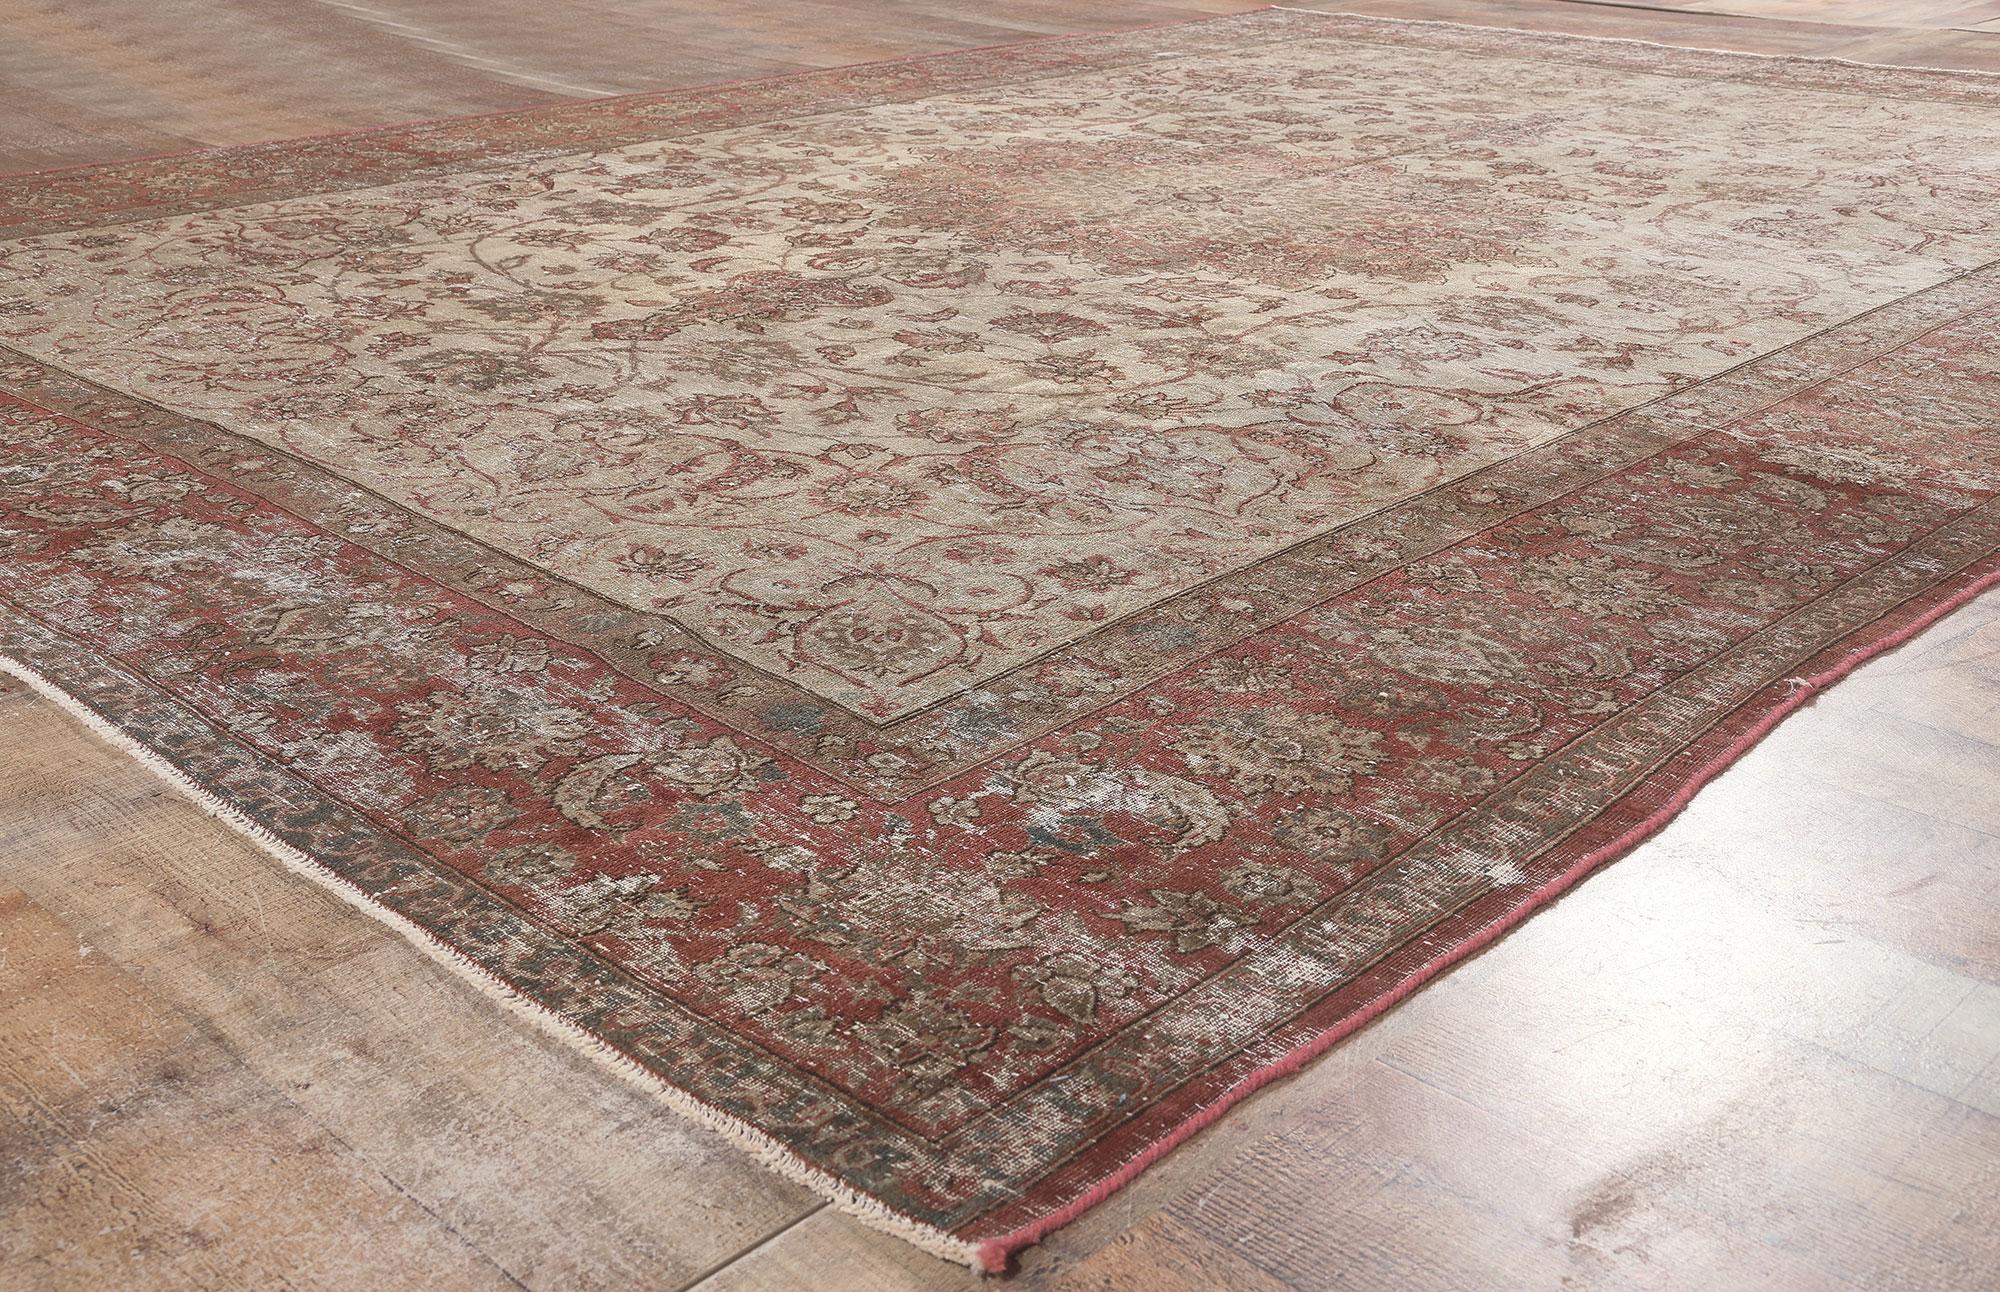 Distressed Vintage Persian Tabriz Rug with Faded Earth-Tone Colors For Sale 1